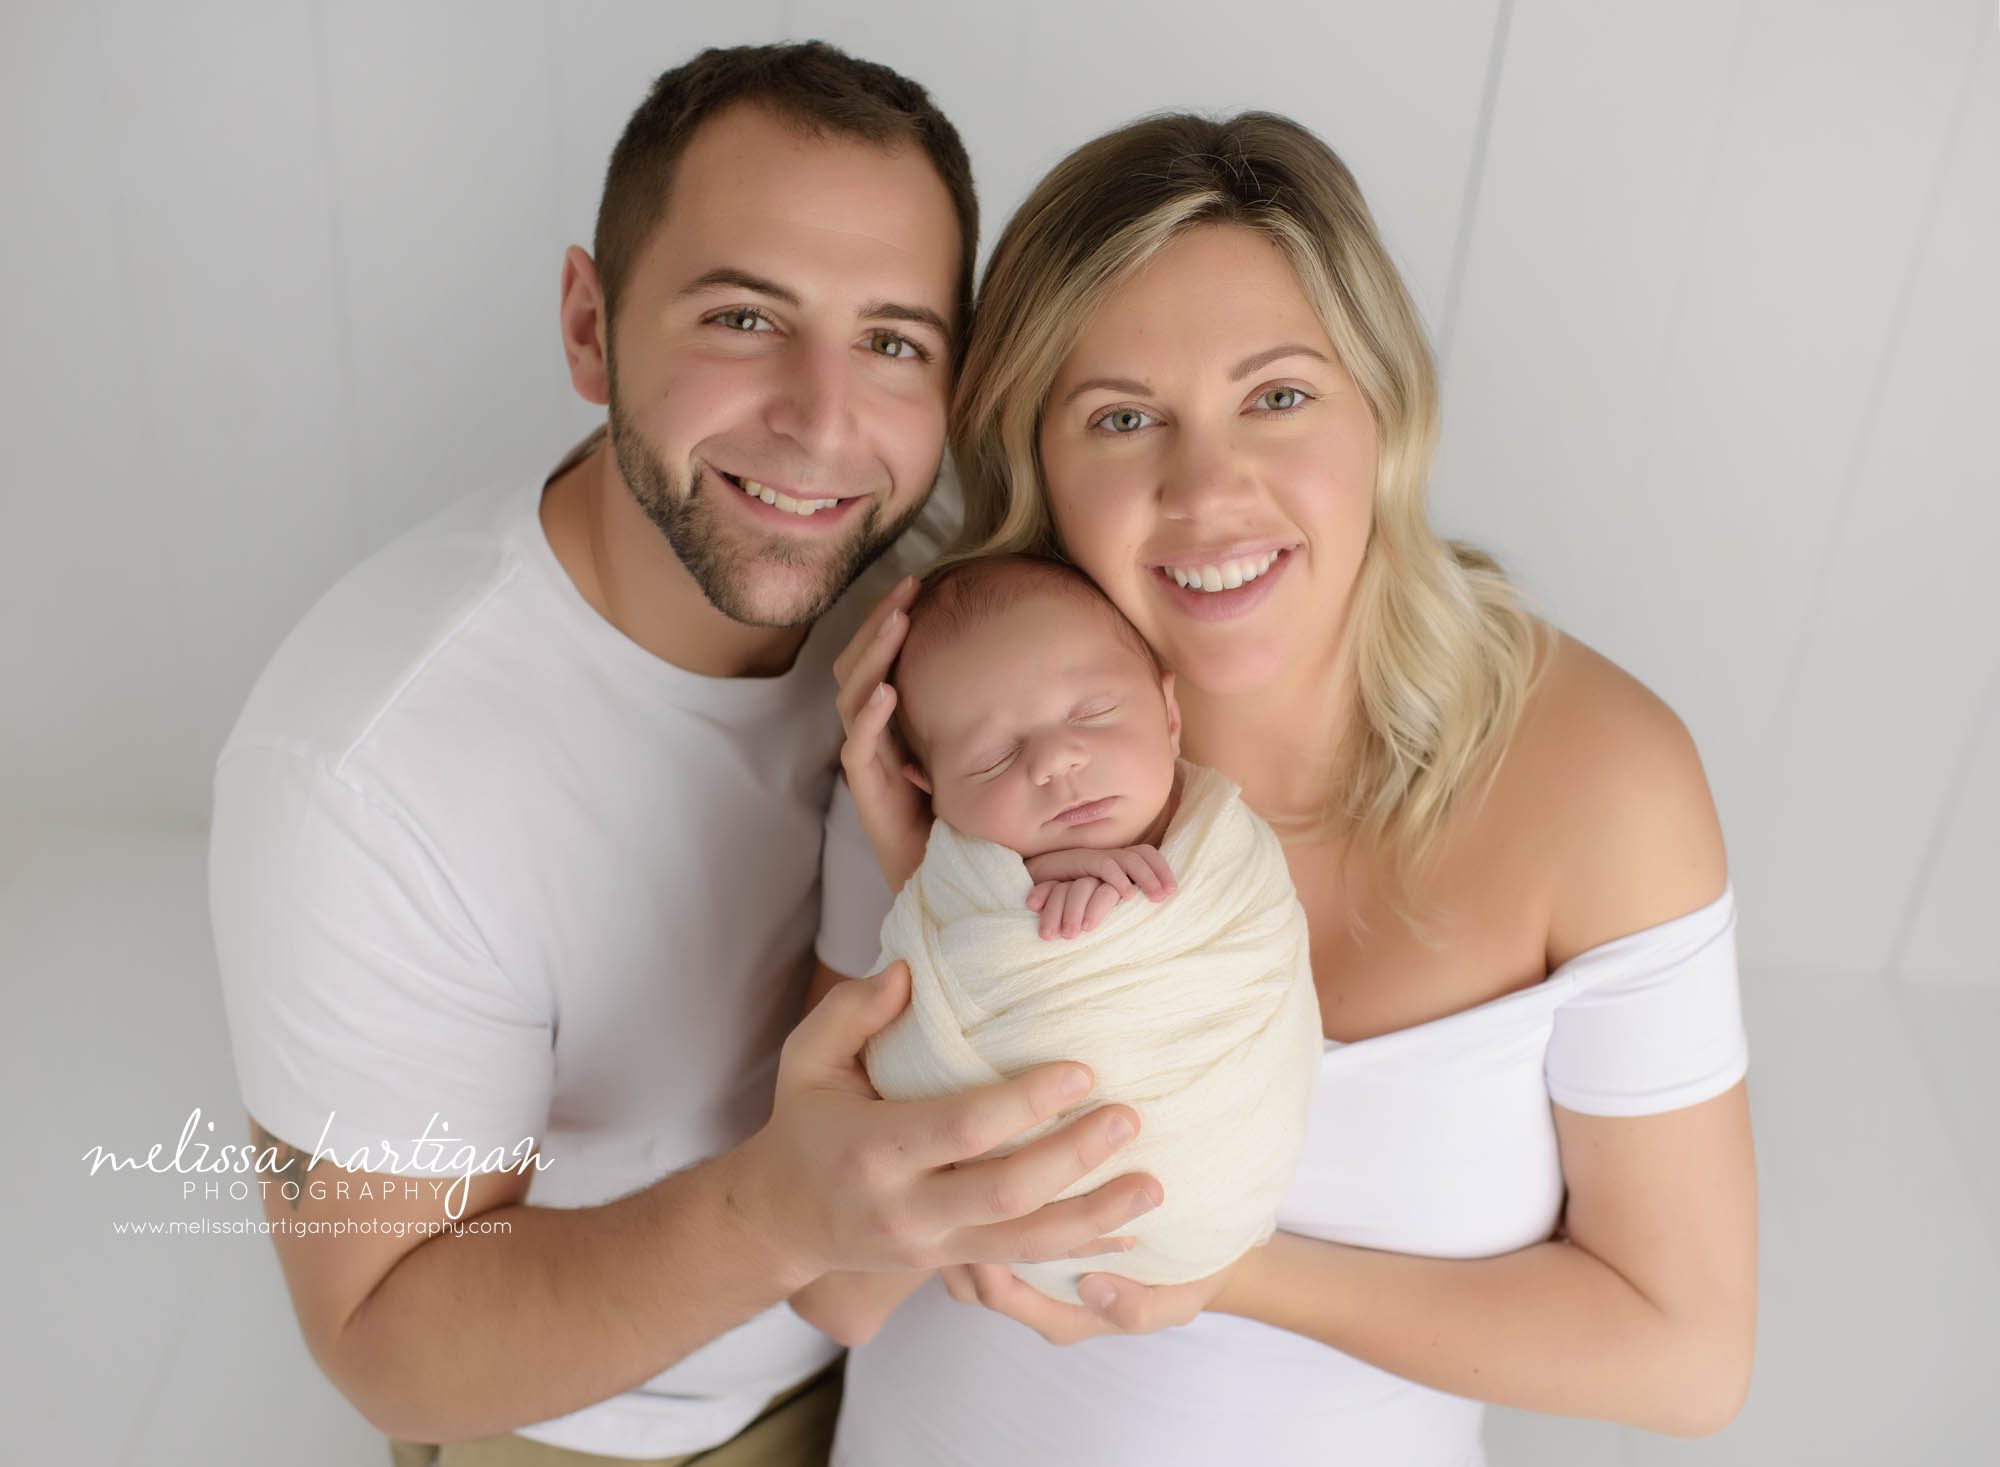 mom dad holding newborn son wrapped in ivory wrap in family photo in baby photography session in Connecticut studio